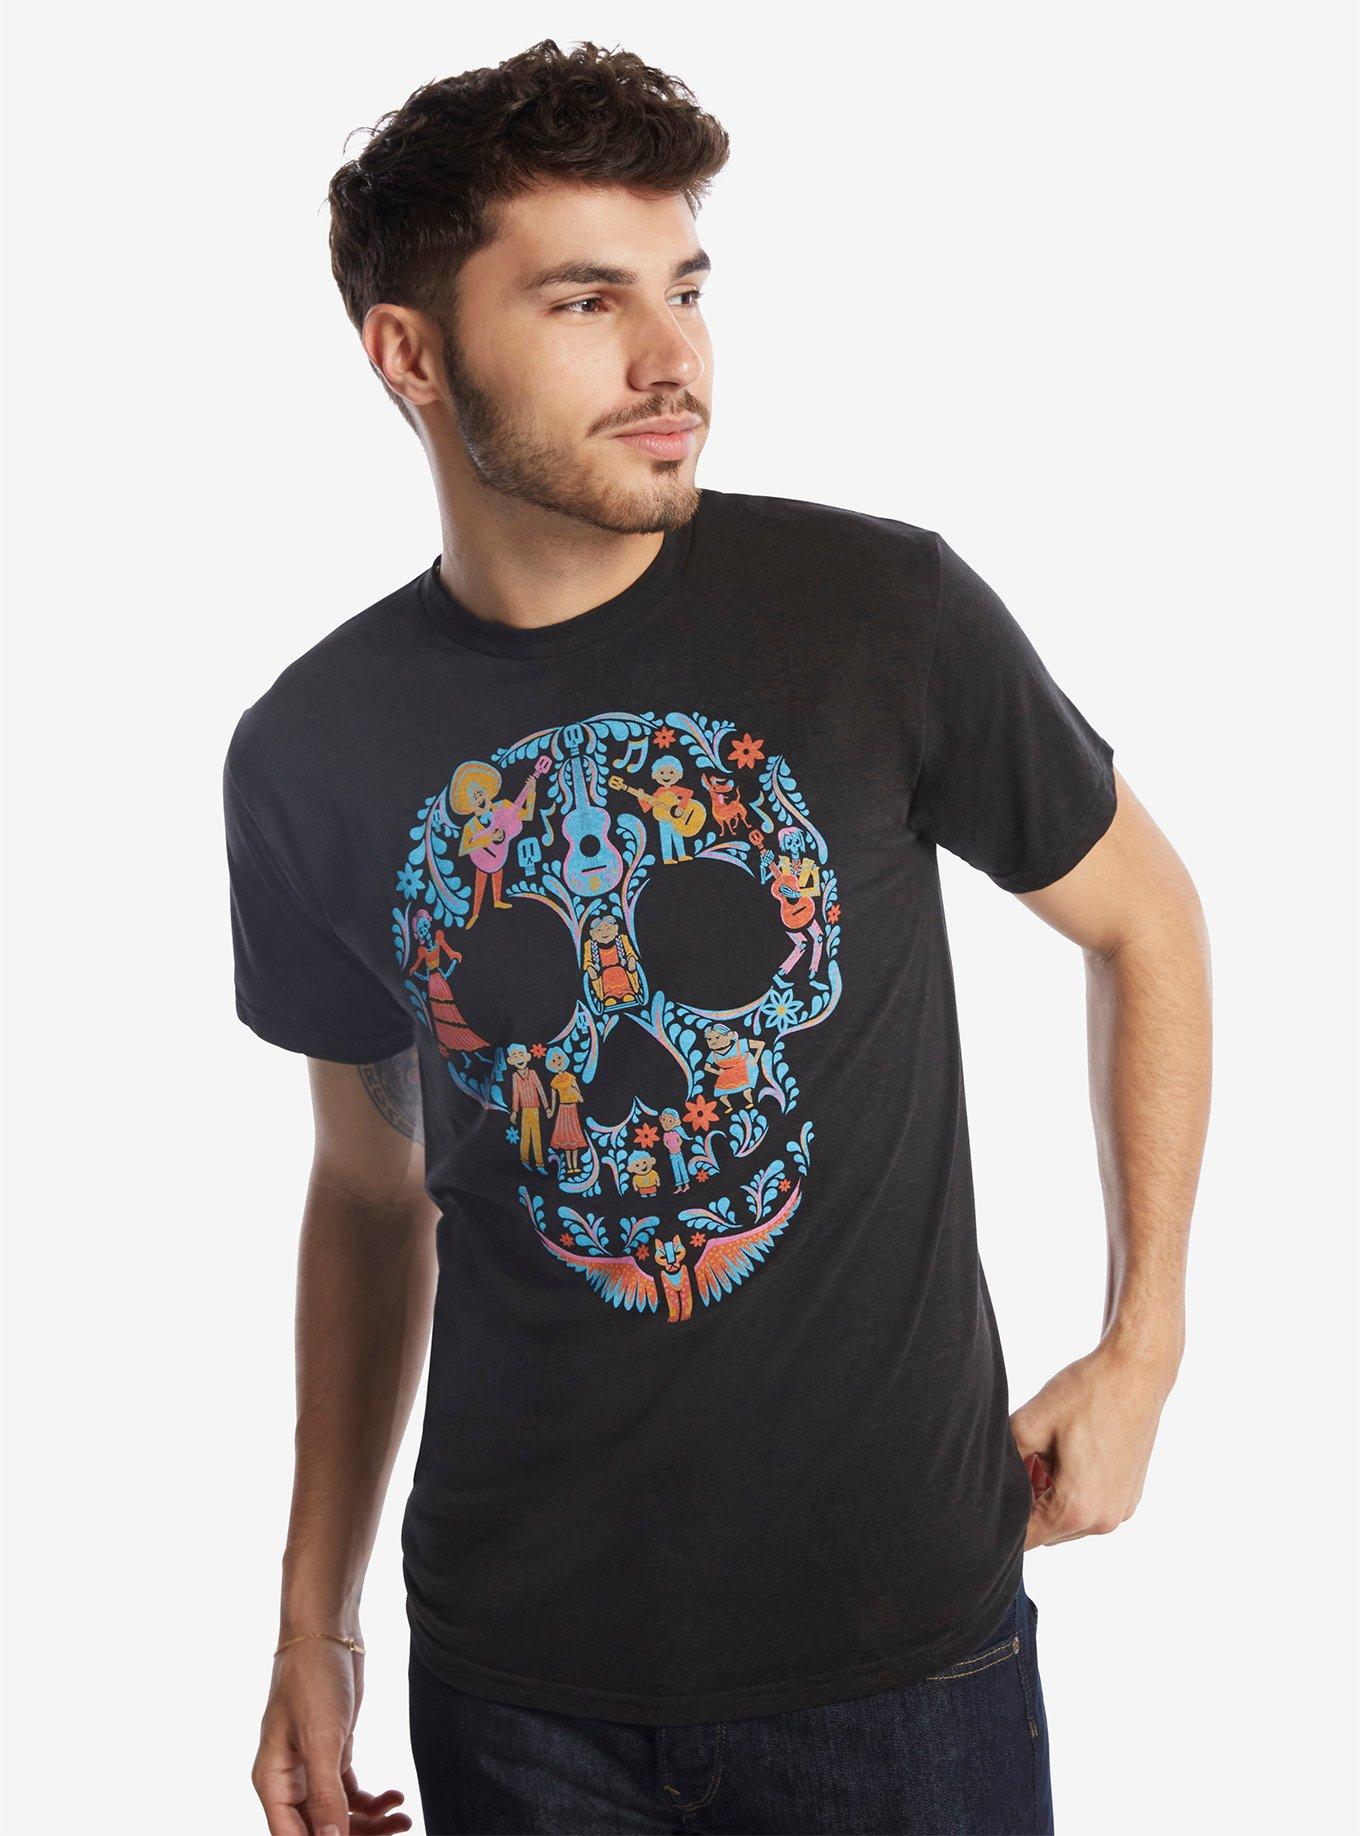 Disney Pixar Coco Family Skull T-Shirt - BoxLunch Exclusive | BoxLunch